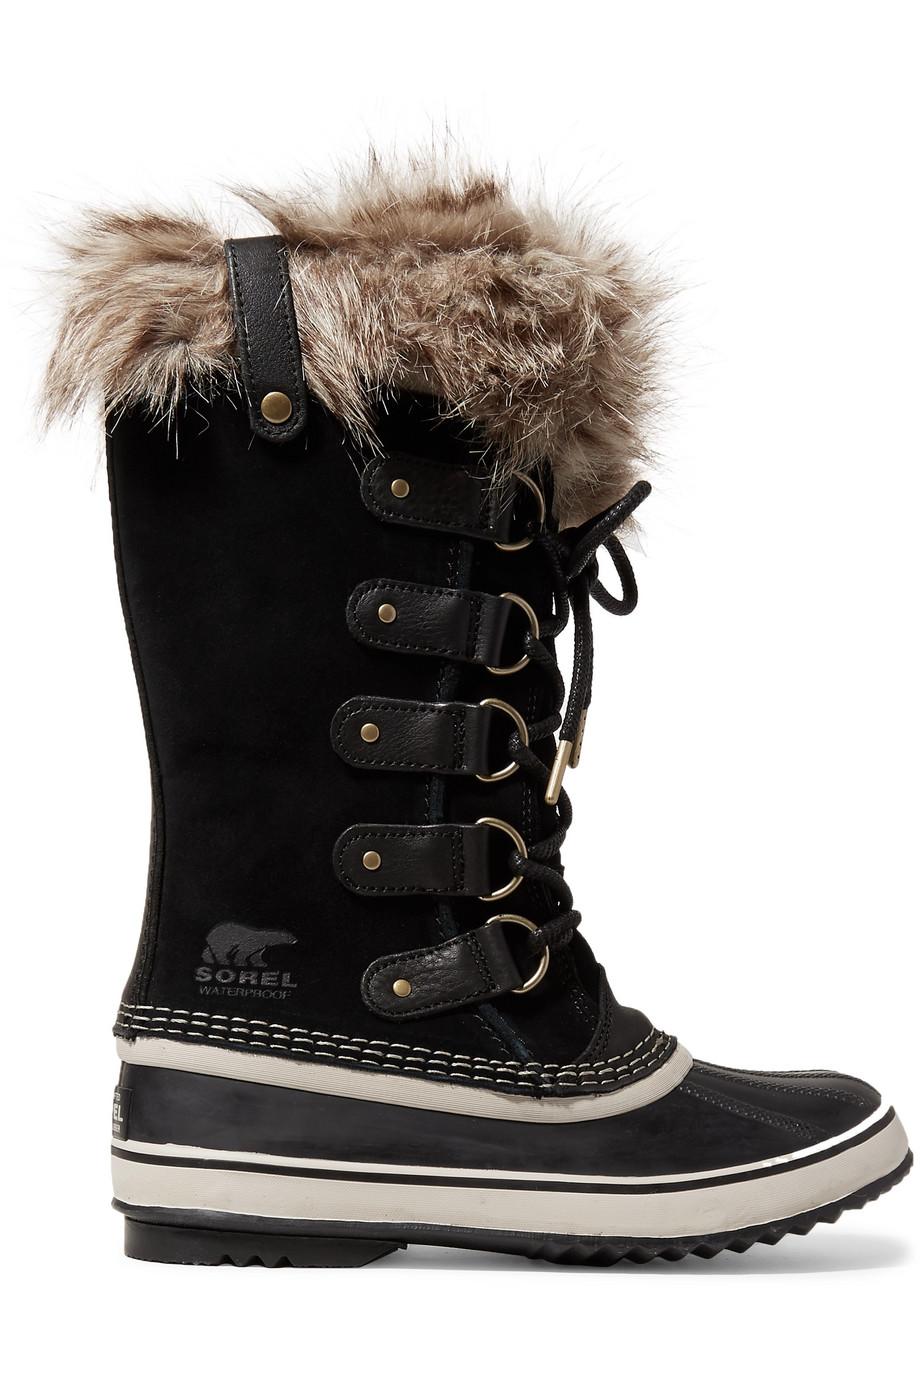 18 Winter Boots That Will Keep You Warm No Matter What | Who What Wear